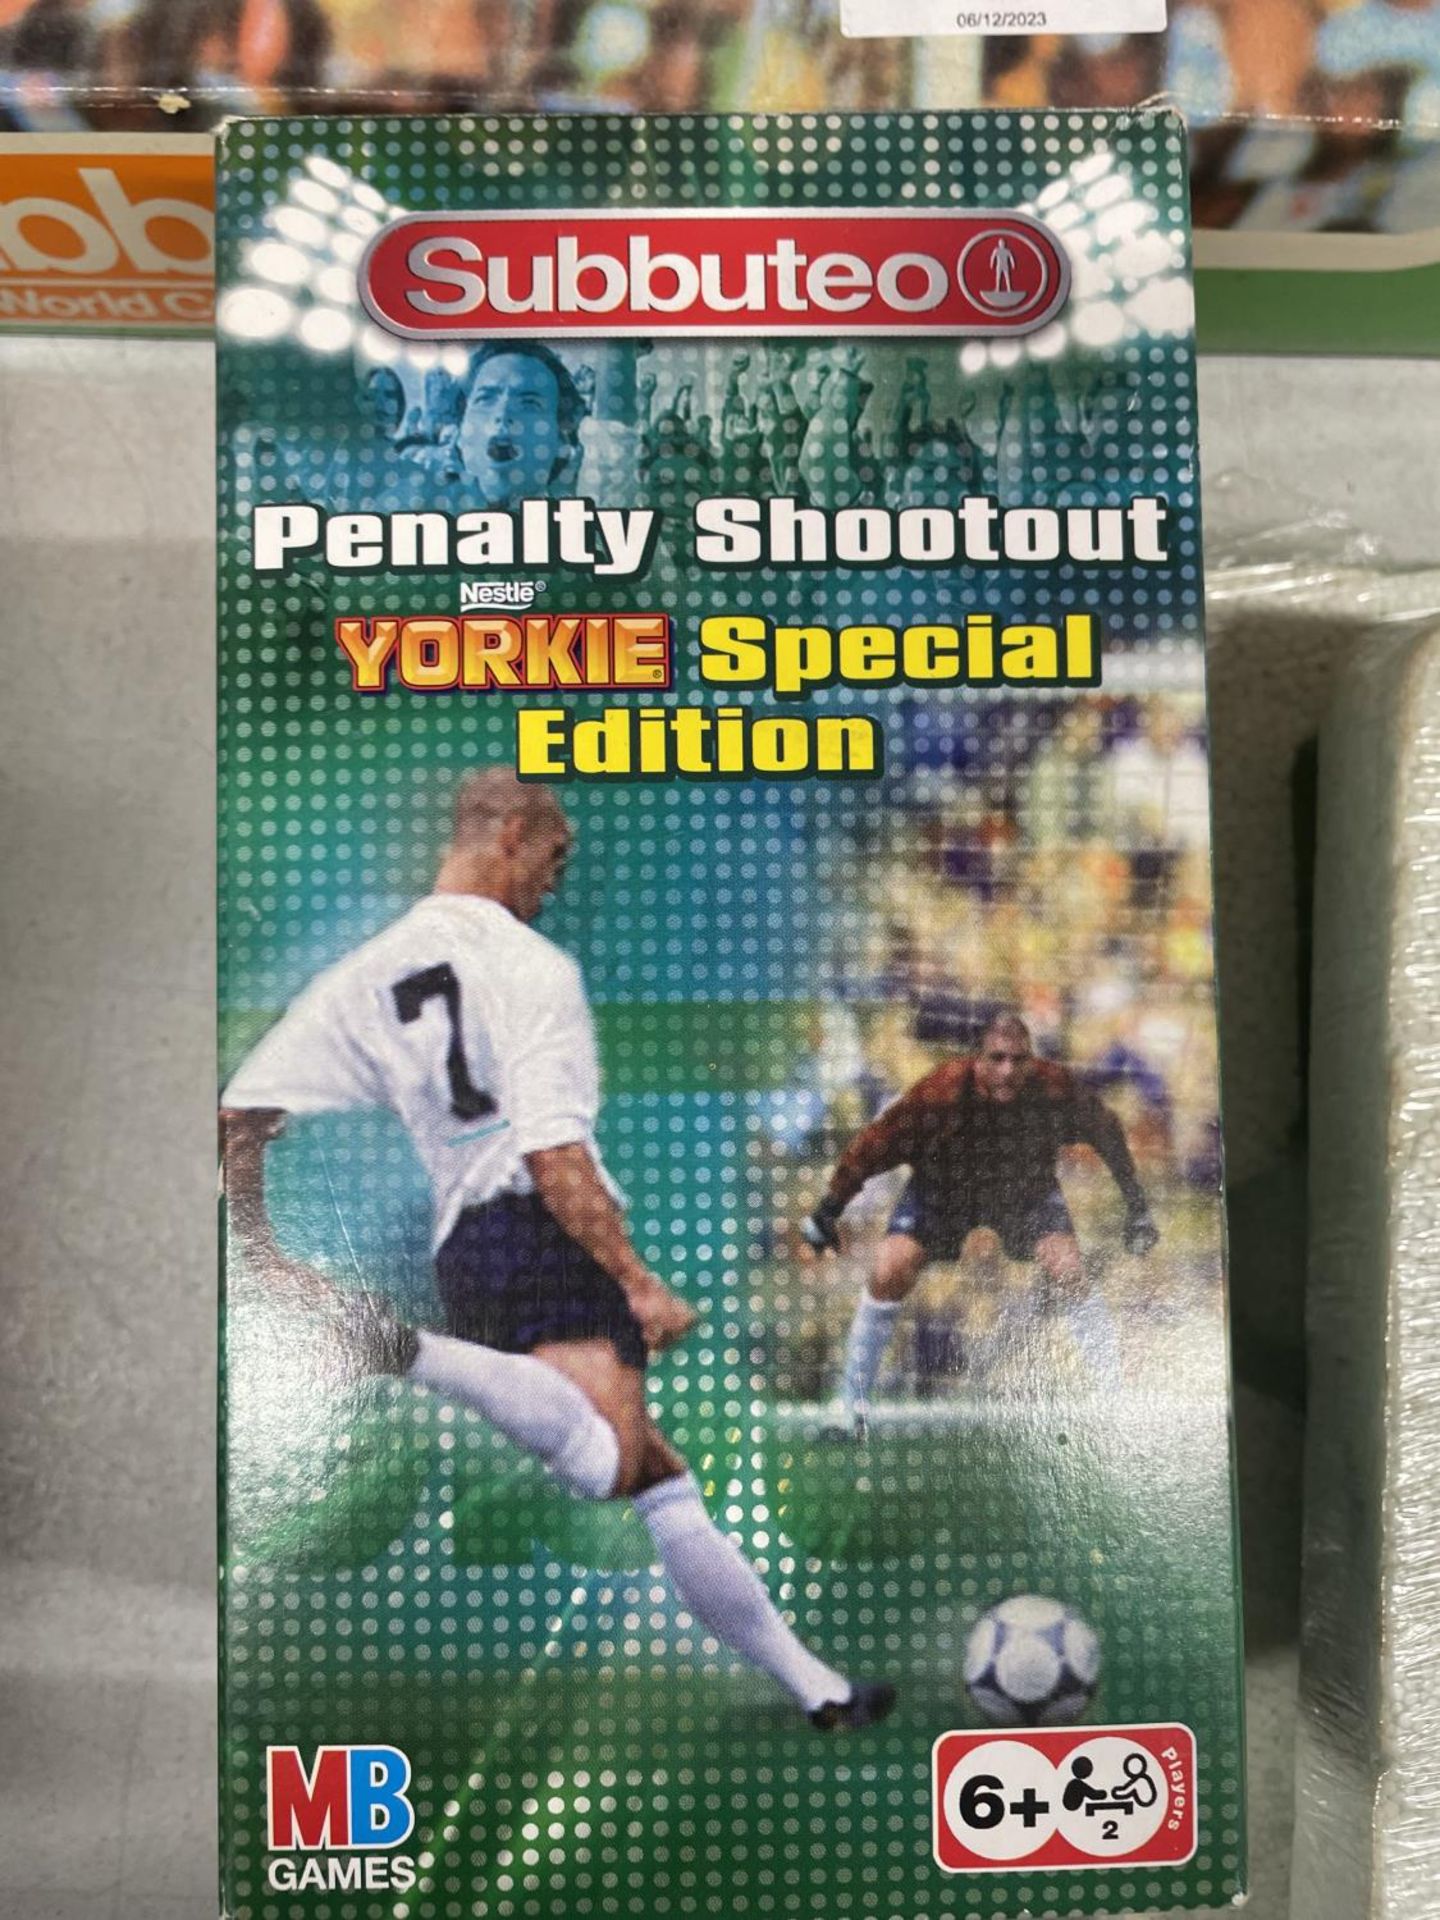 A VINTAGE SUBBUTEO WORLD CUP EDITION FOOTBALL GAME NO. 60240, 4 FOOTBALL TEAMS - 2 MISSING - Image 3 of 4